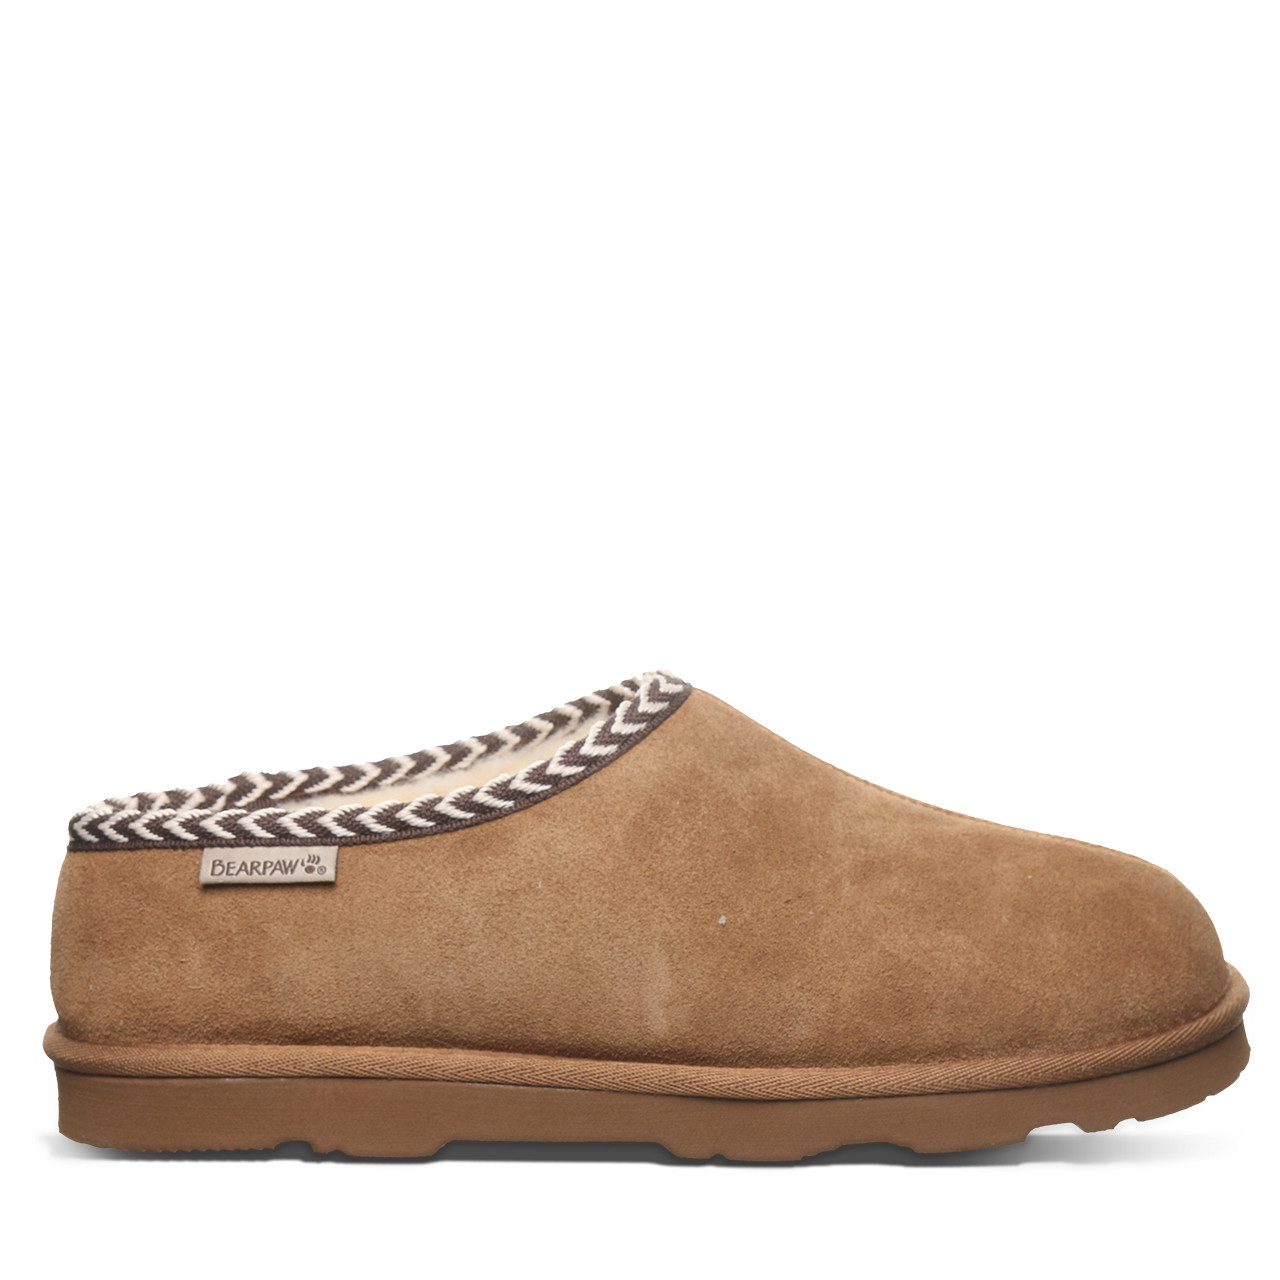 BEARPAW ® Official Site | Men's Boots, Slippers & Shoes